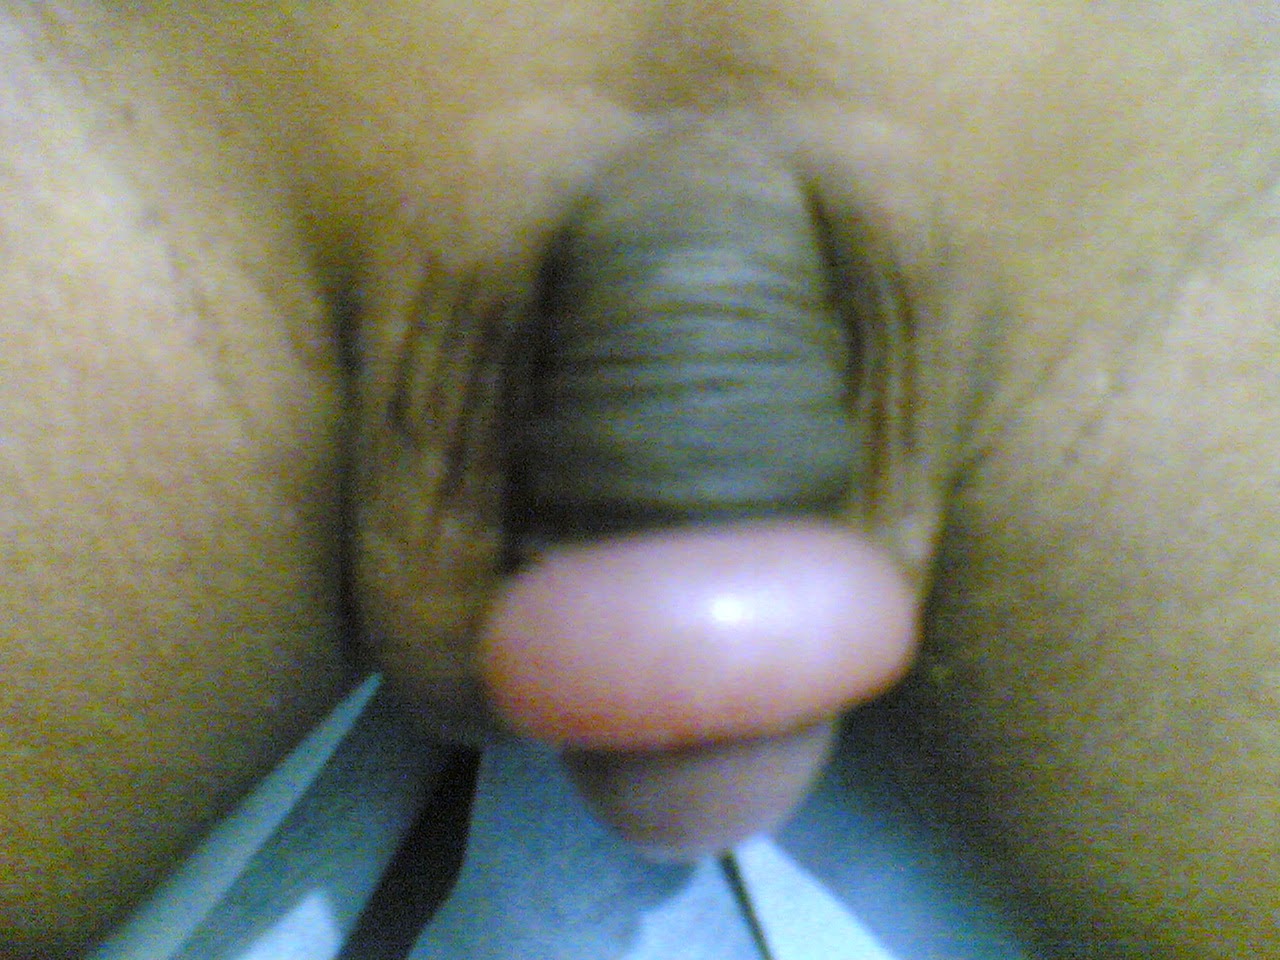   Paraphimosis Paraphimosis is a condition in which the foreskin once pulled back behind the glans cannot be brought down to the original position. It is an uncommon condition and occurs less often than Phimosis. It is serious condition which can happen in men and boys who have not undergone circumcision. It causes painful swelling of the retracted for skin foreskin of the penis.  Causes of paraphimosis • It can occur after retraction of the foreskin for long hours during penile examination, cleaning, urethral catheterization or cystoscopy • It can also occur during penile ring piercing. • It can also occur secondary to erections. • Infection due to poor personal hygiene. • Trauma to the area.  Signs and symptoms of paraphimosis • Penile pain. • Enlargement of glans penis. • Congested with collar of oedematous foreskin • In children it can cause urinary obstruction.  Treatment of paraphimosis • Pressing on (compression of) the head of penis while pushing the foreskin forward may reduce the swelling due to Paraphimosis. If it fails, surgical circumcision will be needed. • Injection of hyaluronidase in to the oedematous prepuce is effective in reducing the oedema and allowing the fore skin to get reduced. • Surgery  Complications of Paraphimosis • Damage to the penis tip. • Gangrene. • Amputation of the penis tip. • Recurrence of Paraphimosis is common. It is prevented by doing circumcision.